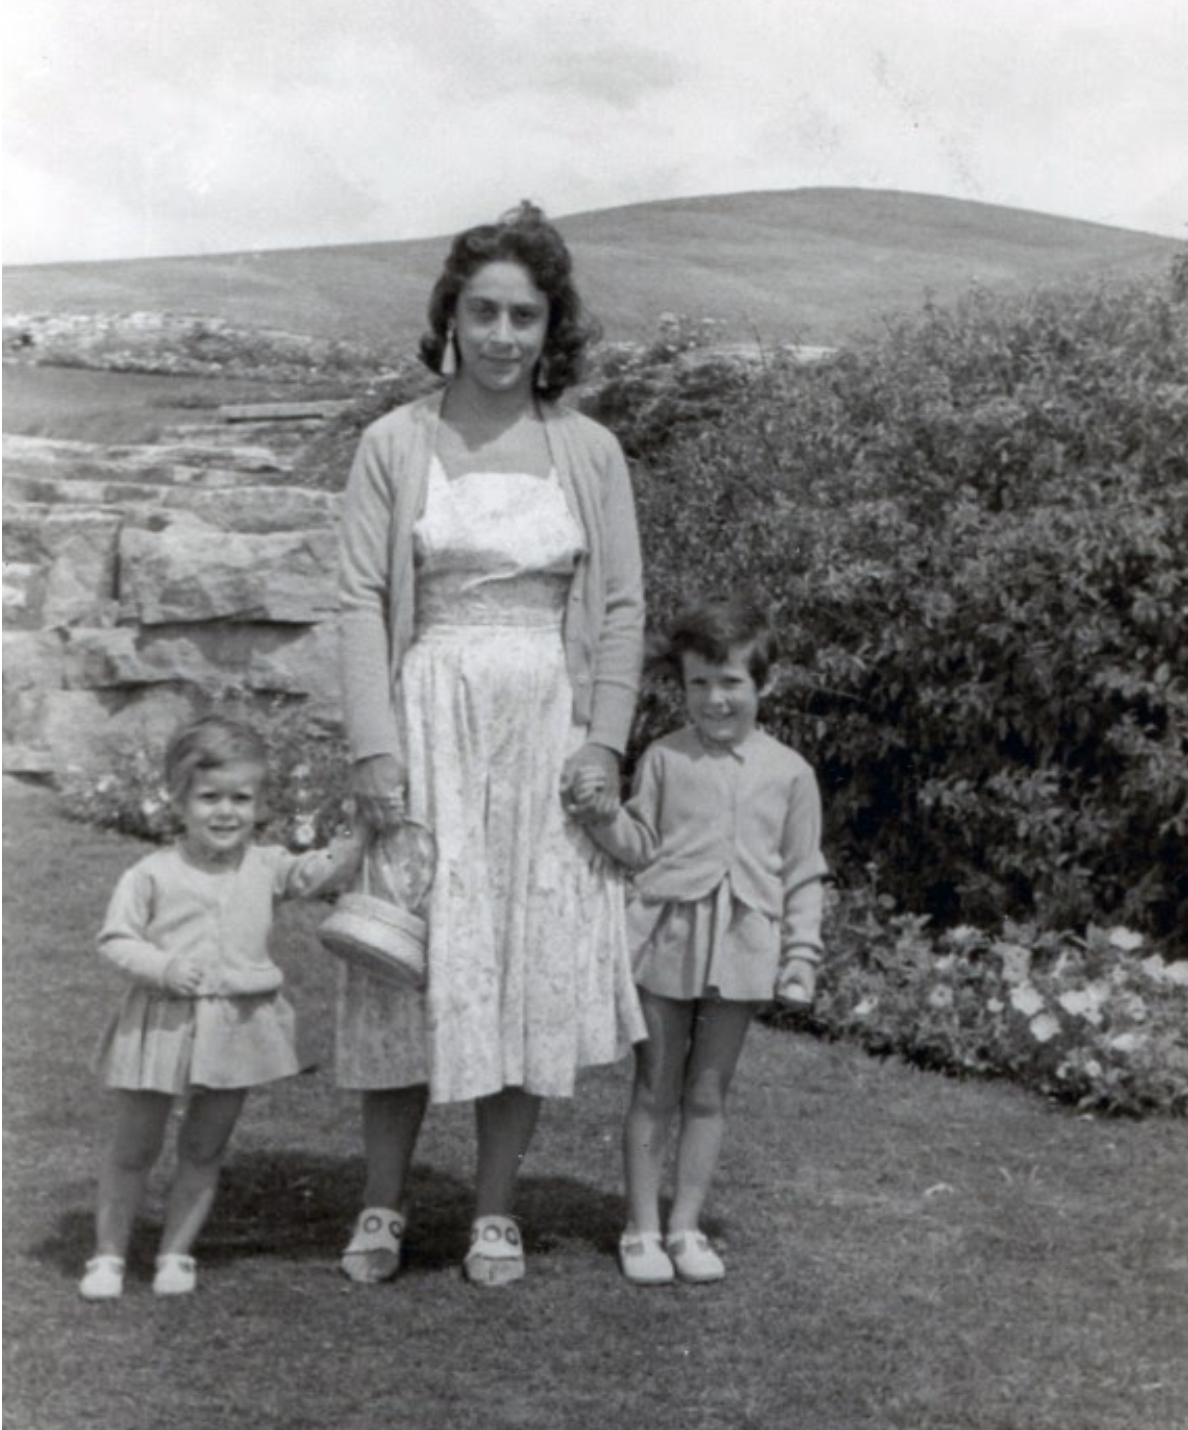 My mom, my sister Claudia, and me. 1954-55